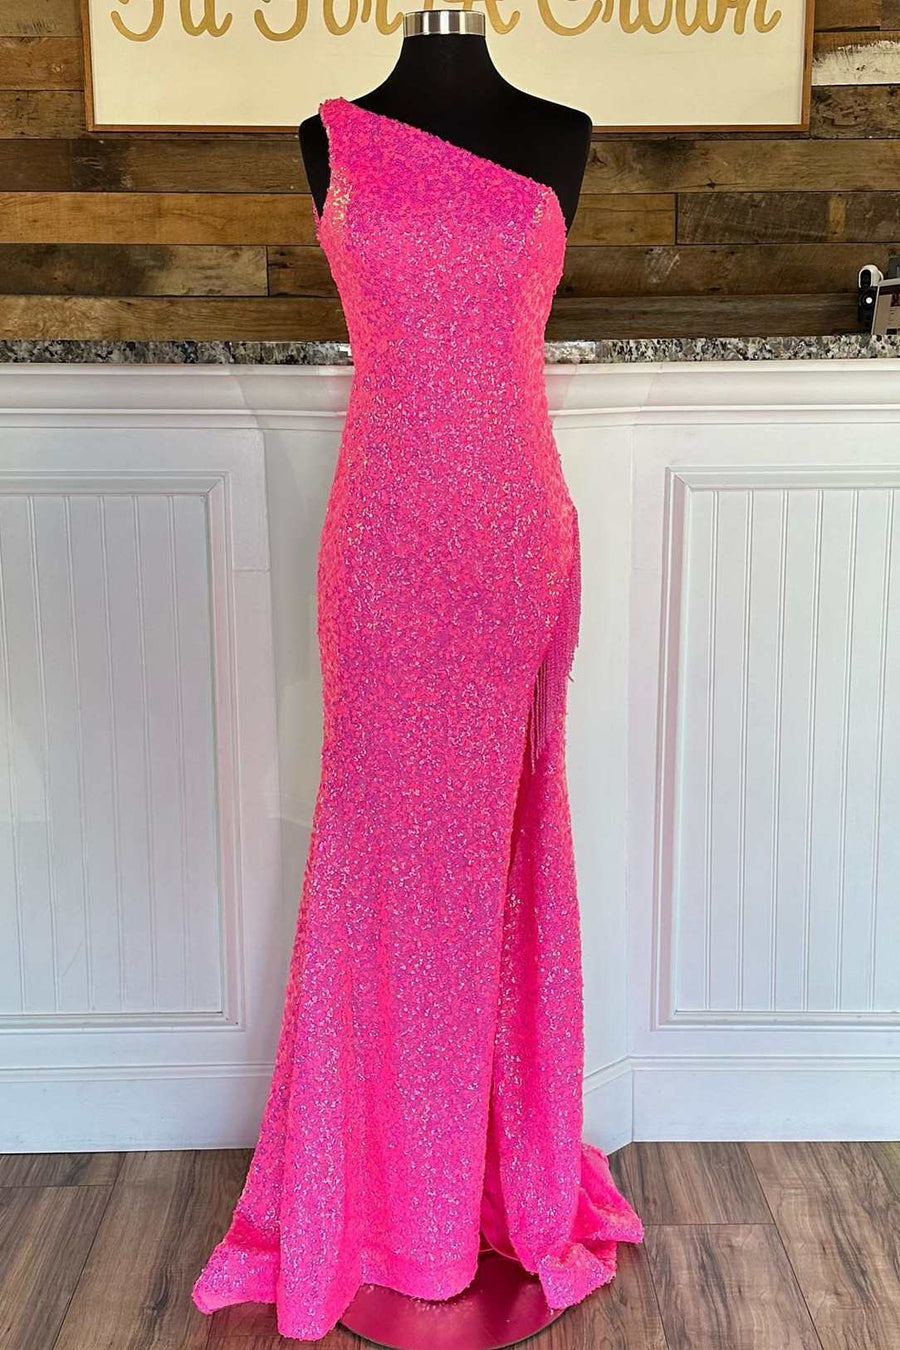 Hot Pink Sequin One-Shoulder Long Prom Dress with Tassels